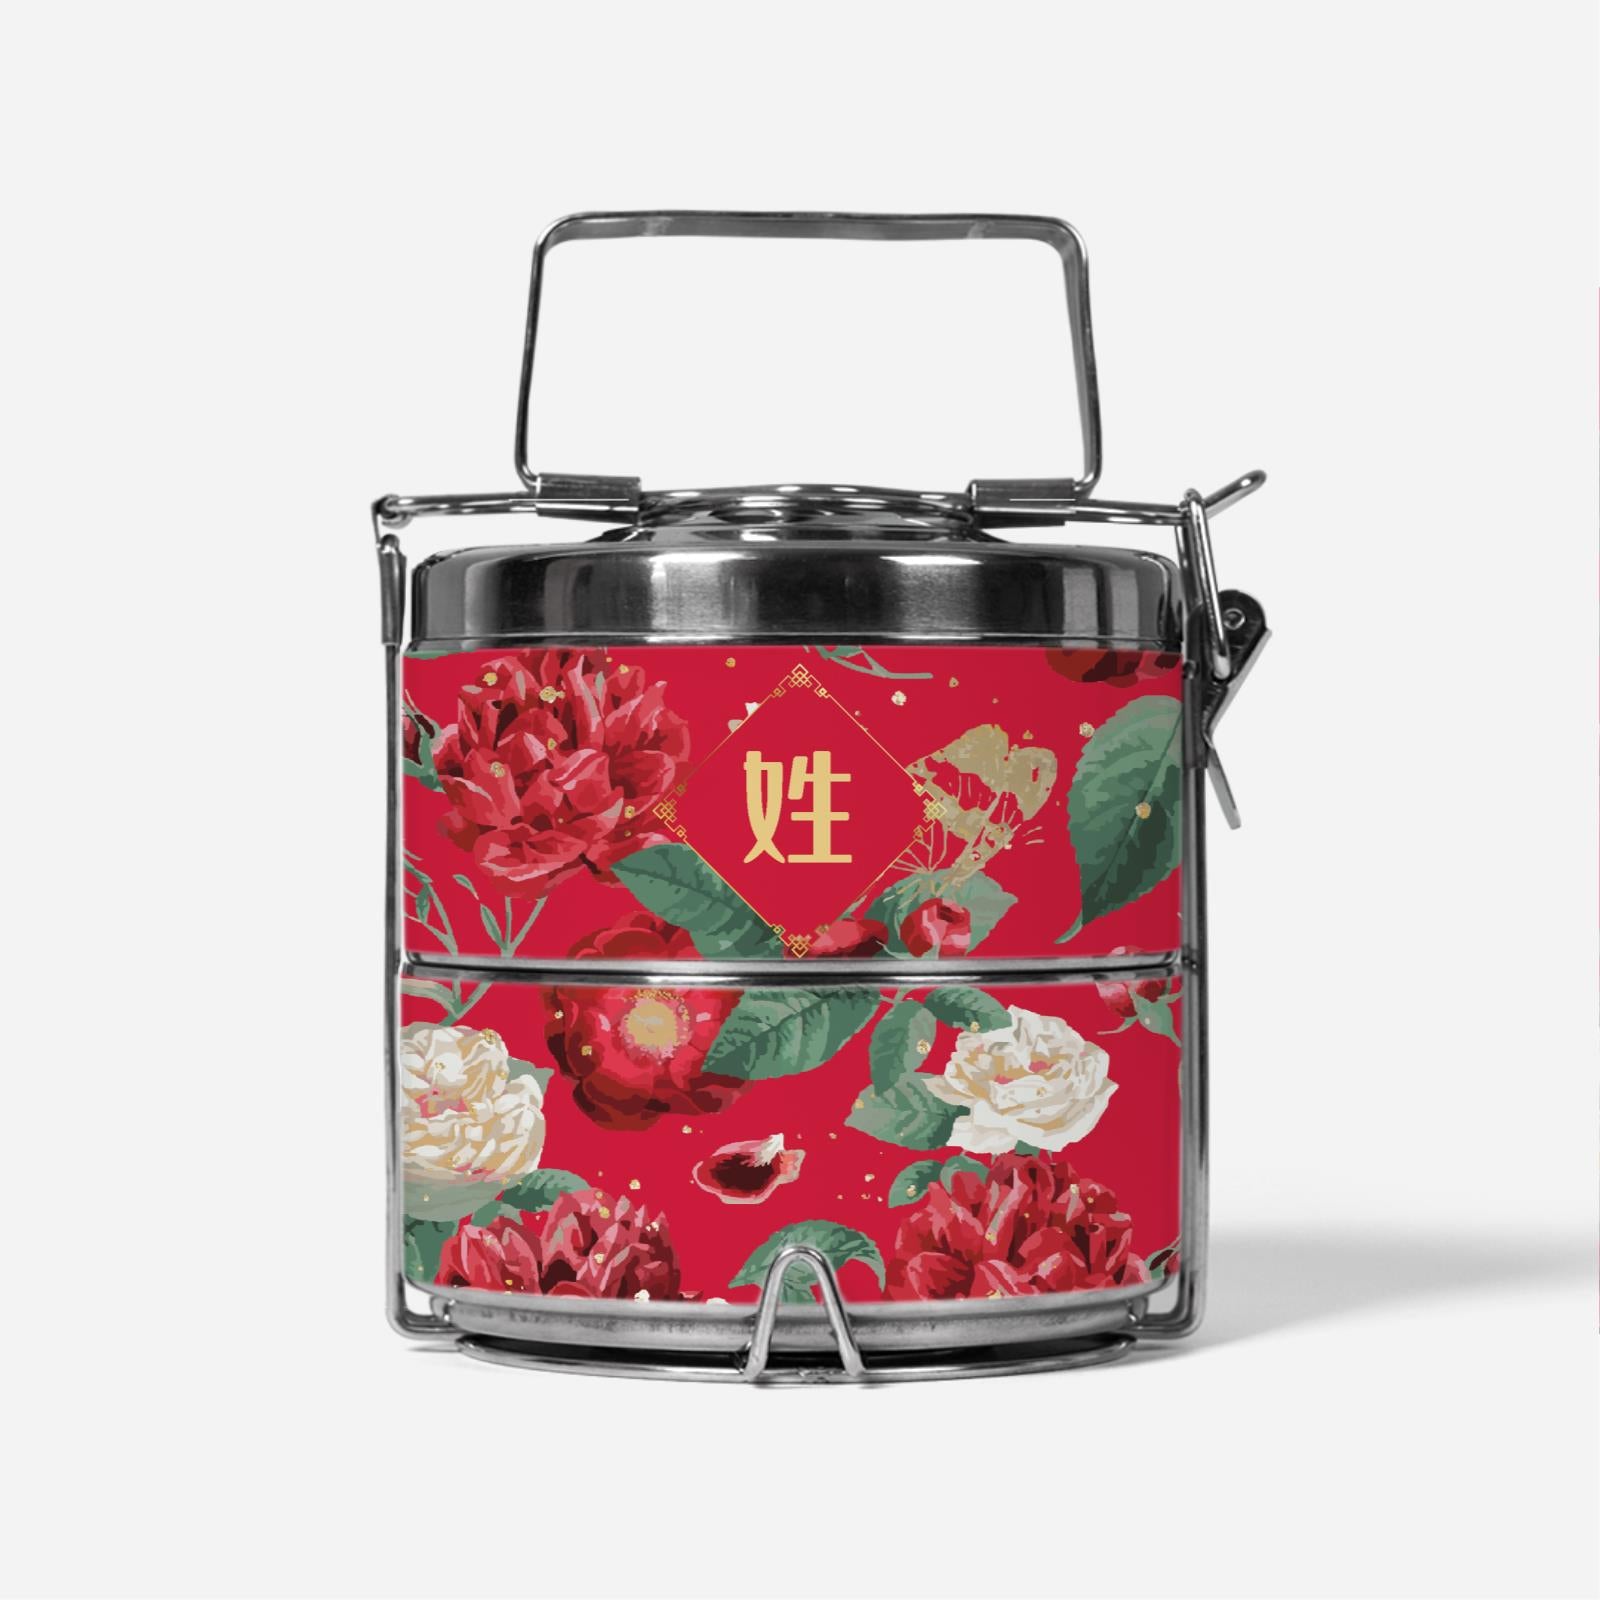 Royal Floral Series With Chinese Surname Two Tier Premium Tiffin Carrier - Scorching Passion